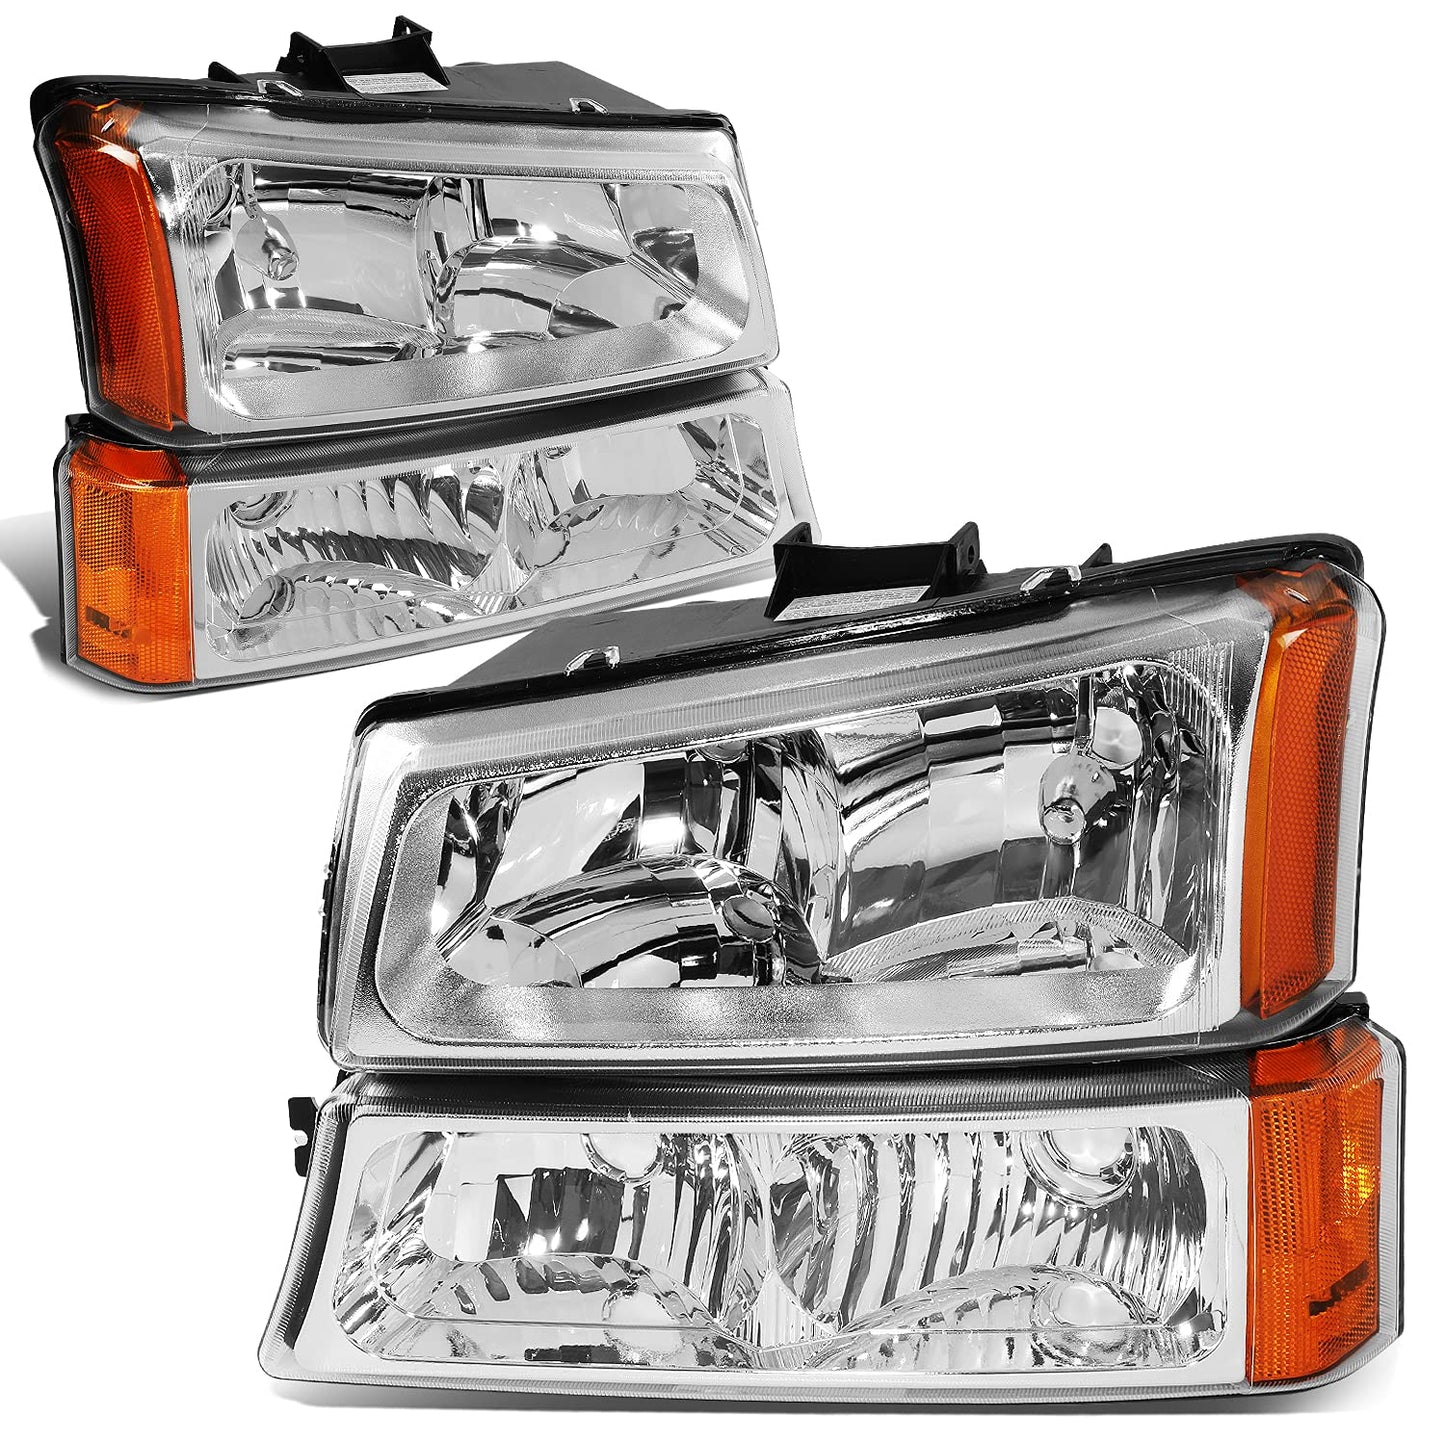 DNA Motoring HL-OH-CS03-4P-CH-AM Chrome Amber Headlights Compatible with 2003-2006 Chevy Silverado/Avalanche Chrome / Amber